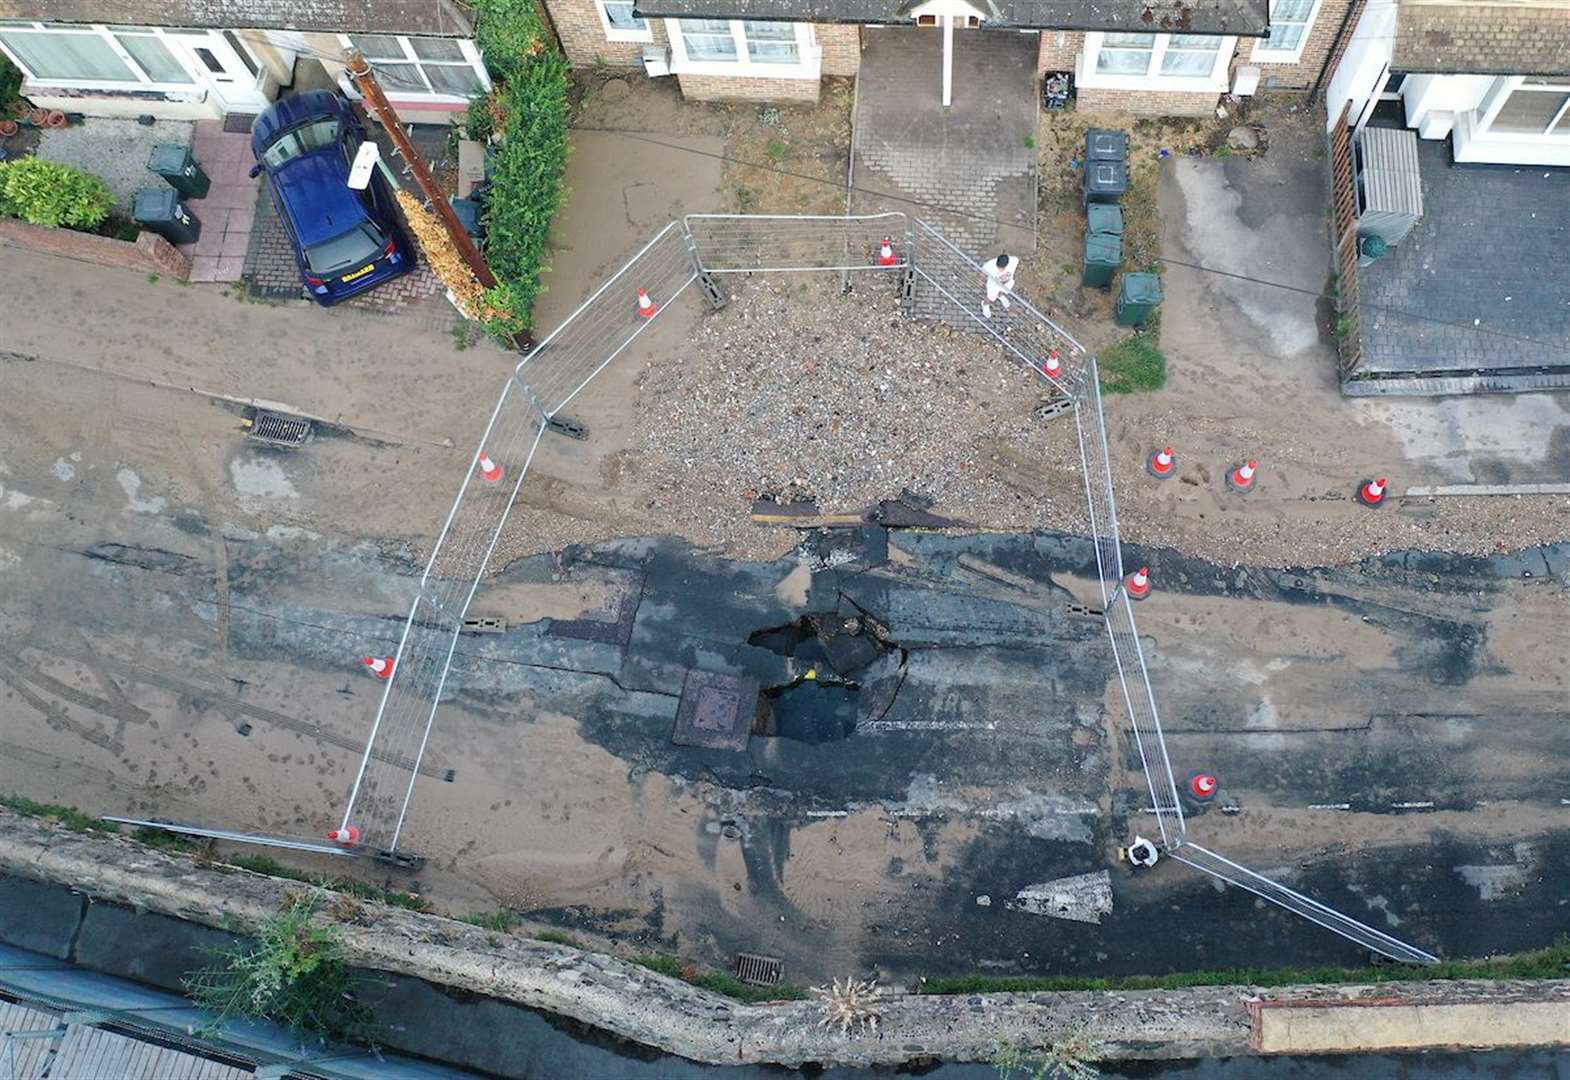 Sinkhole opens in street after water main bursts